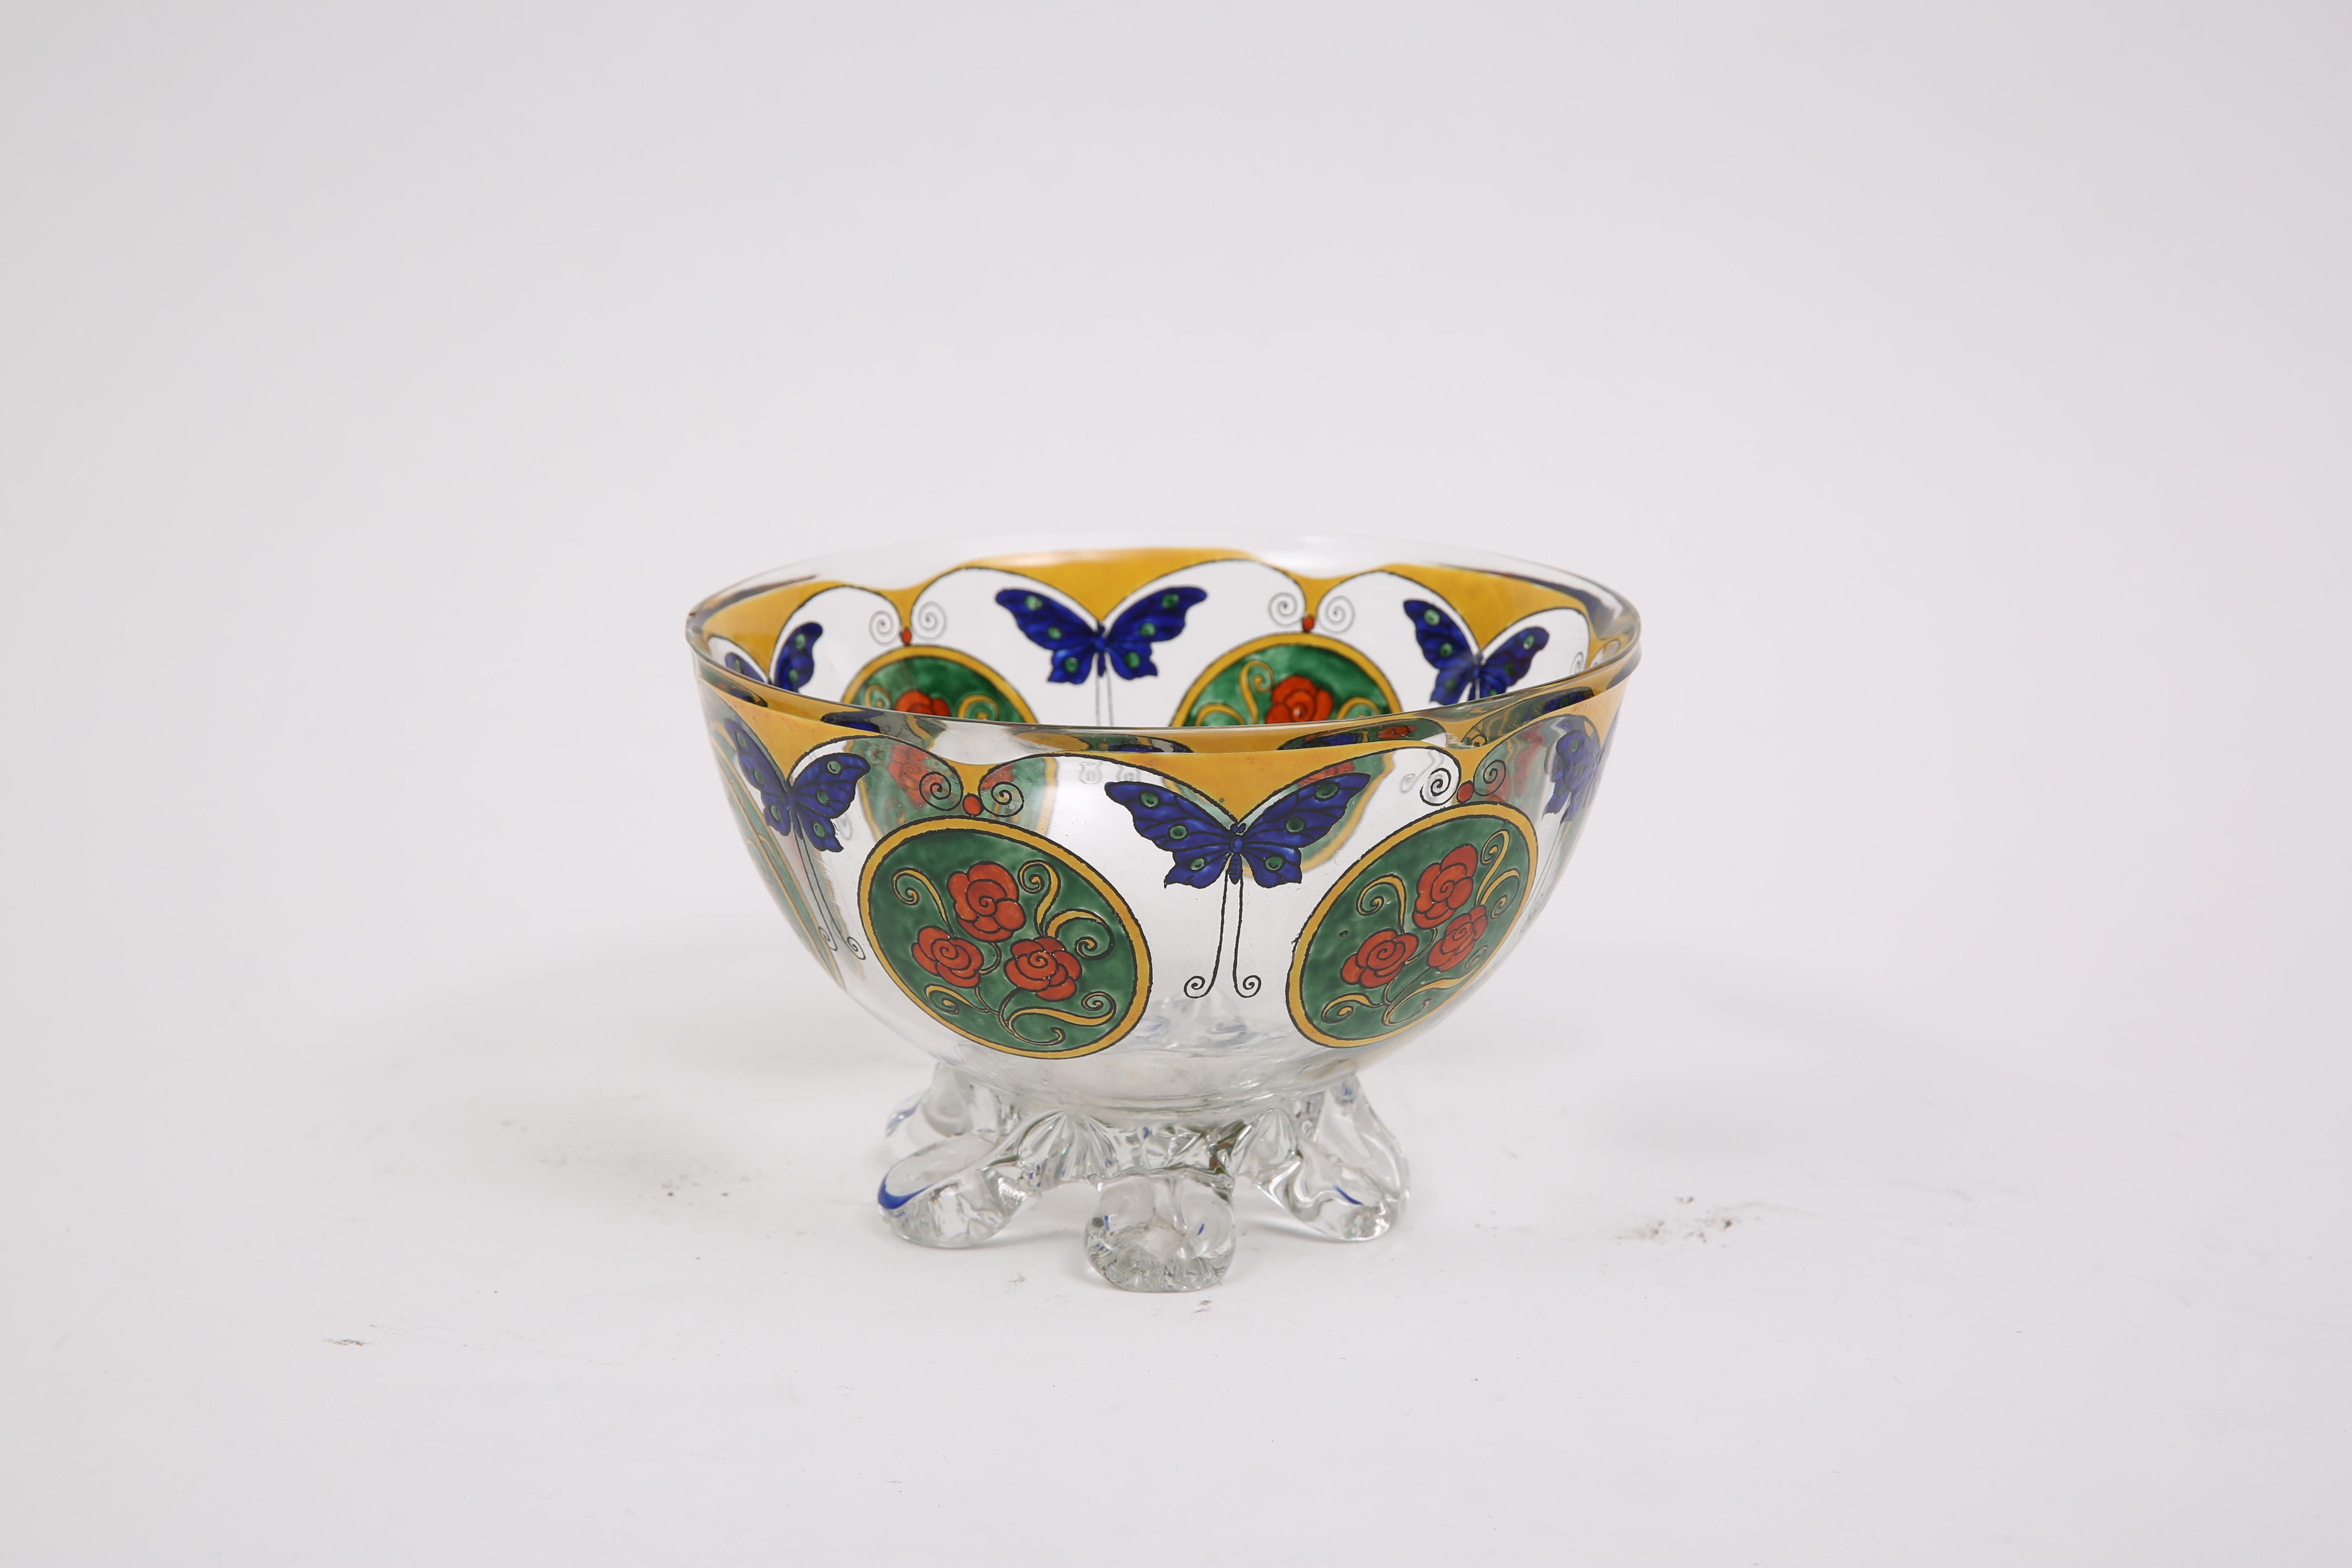 Charming goblet on glass feet decorated with butterflies and roses by the crystal factory of Sevres, from the 1925 period. Very stylized art-deco piece with enamel decoration, beautiful bright colors on this rotating decor alternating with